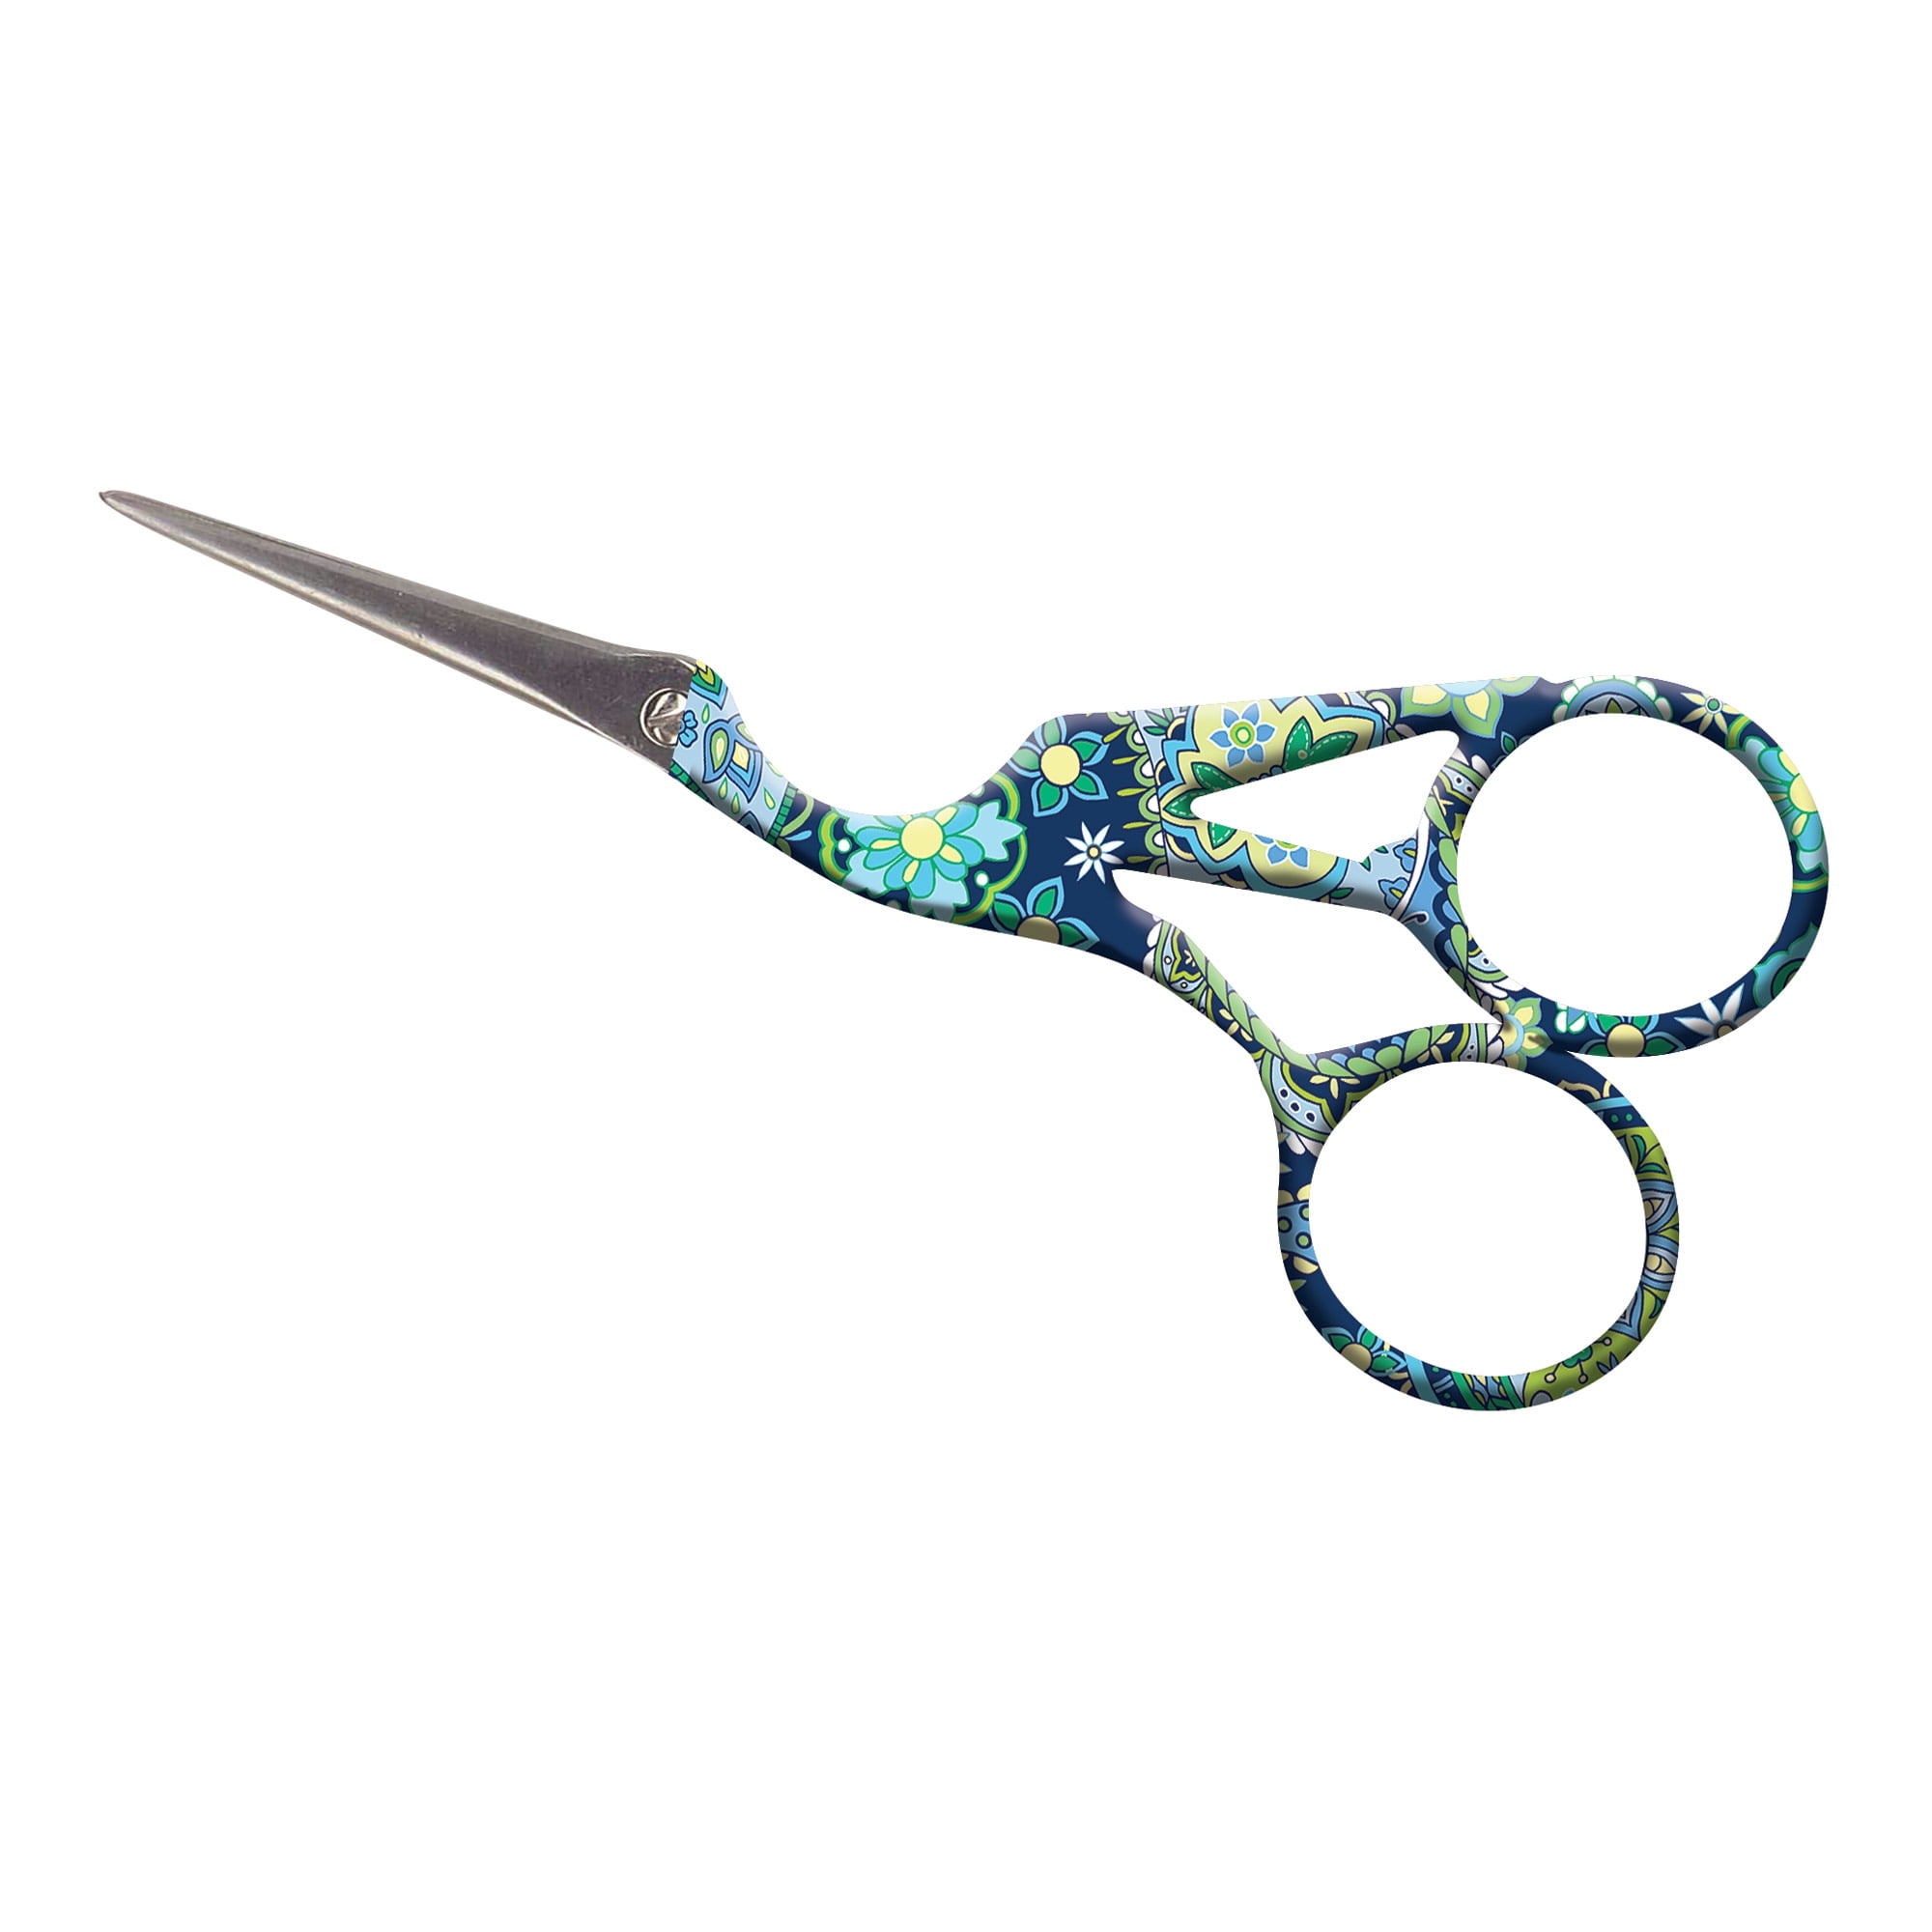 WISS 766 - 6 Sewing and embroidery scissors.